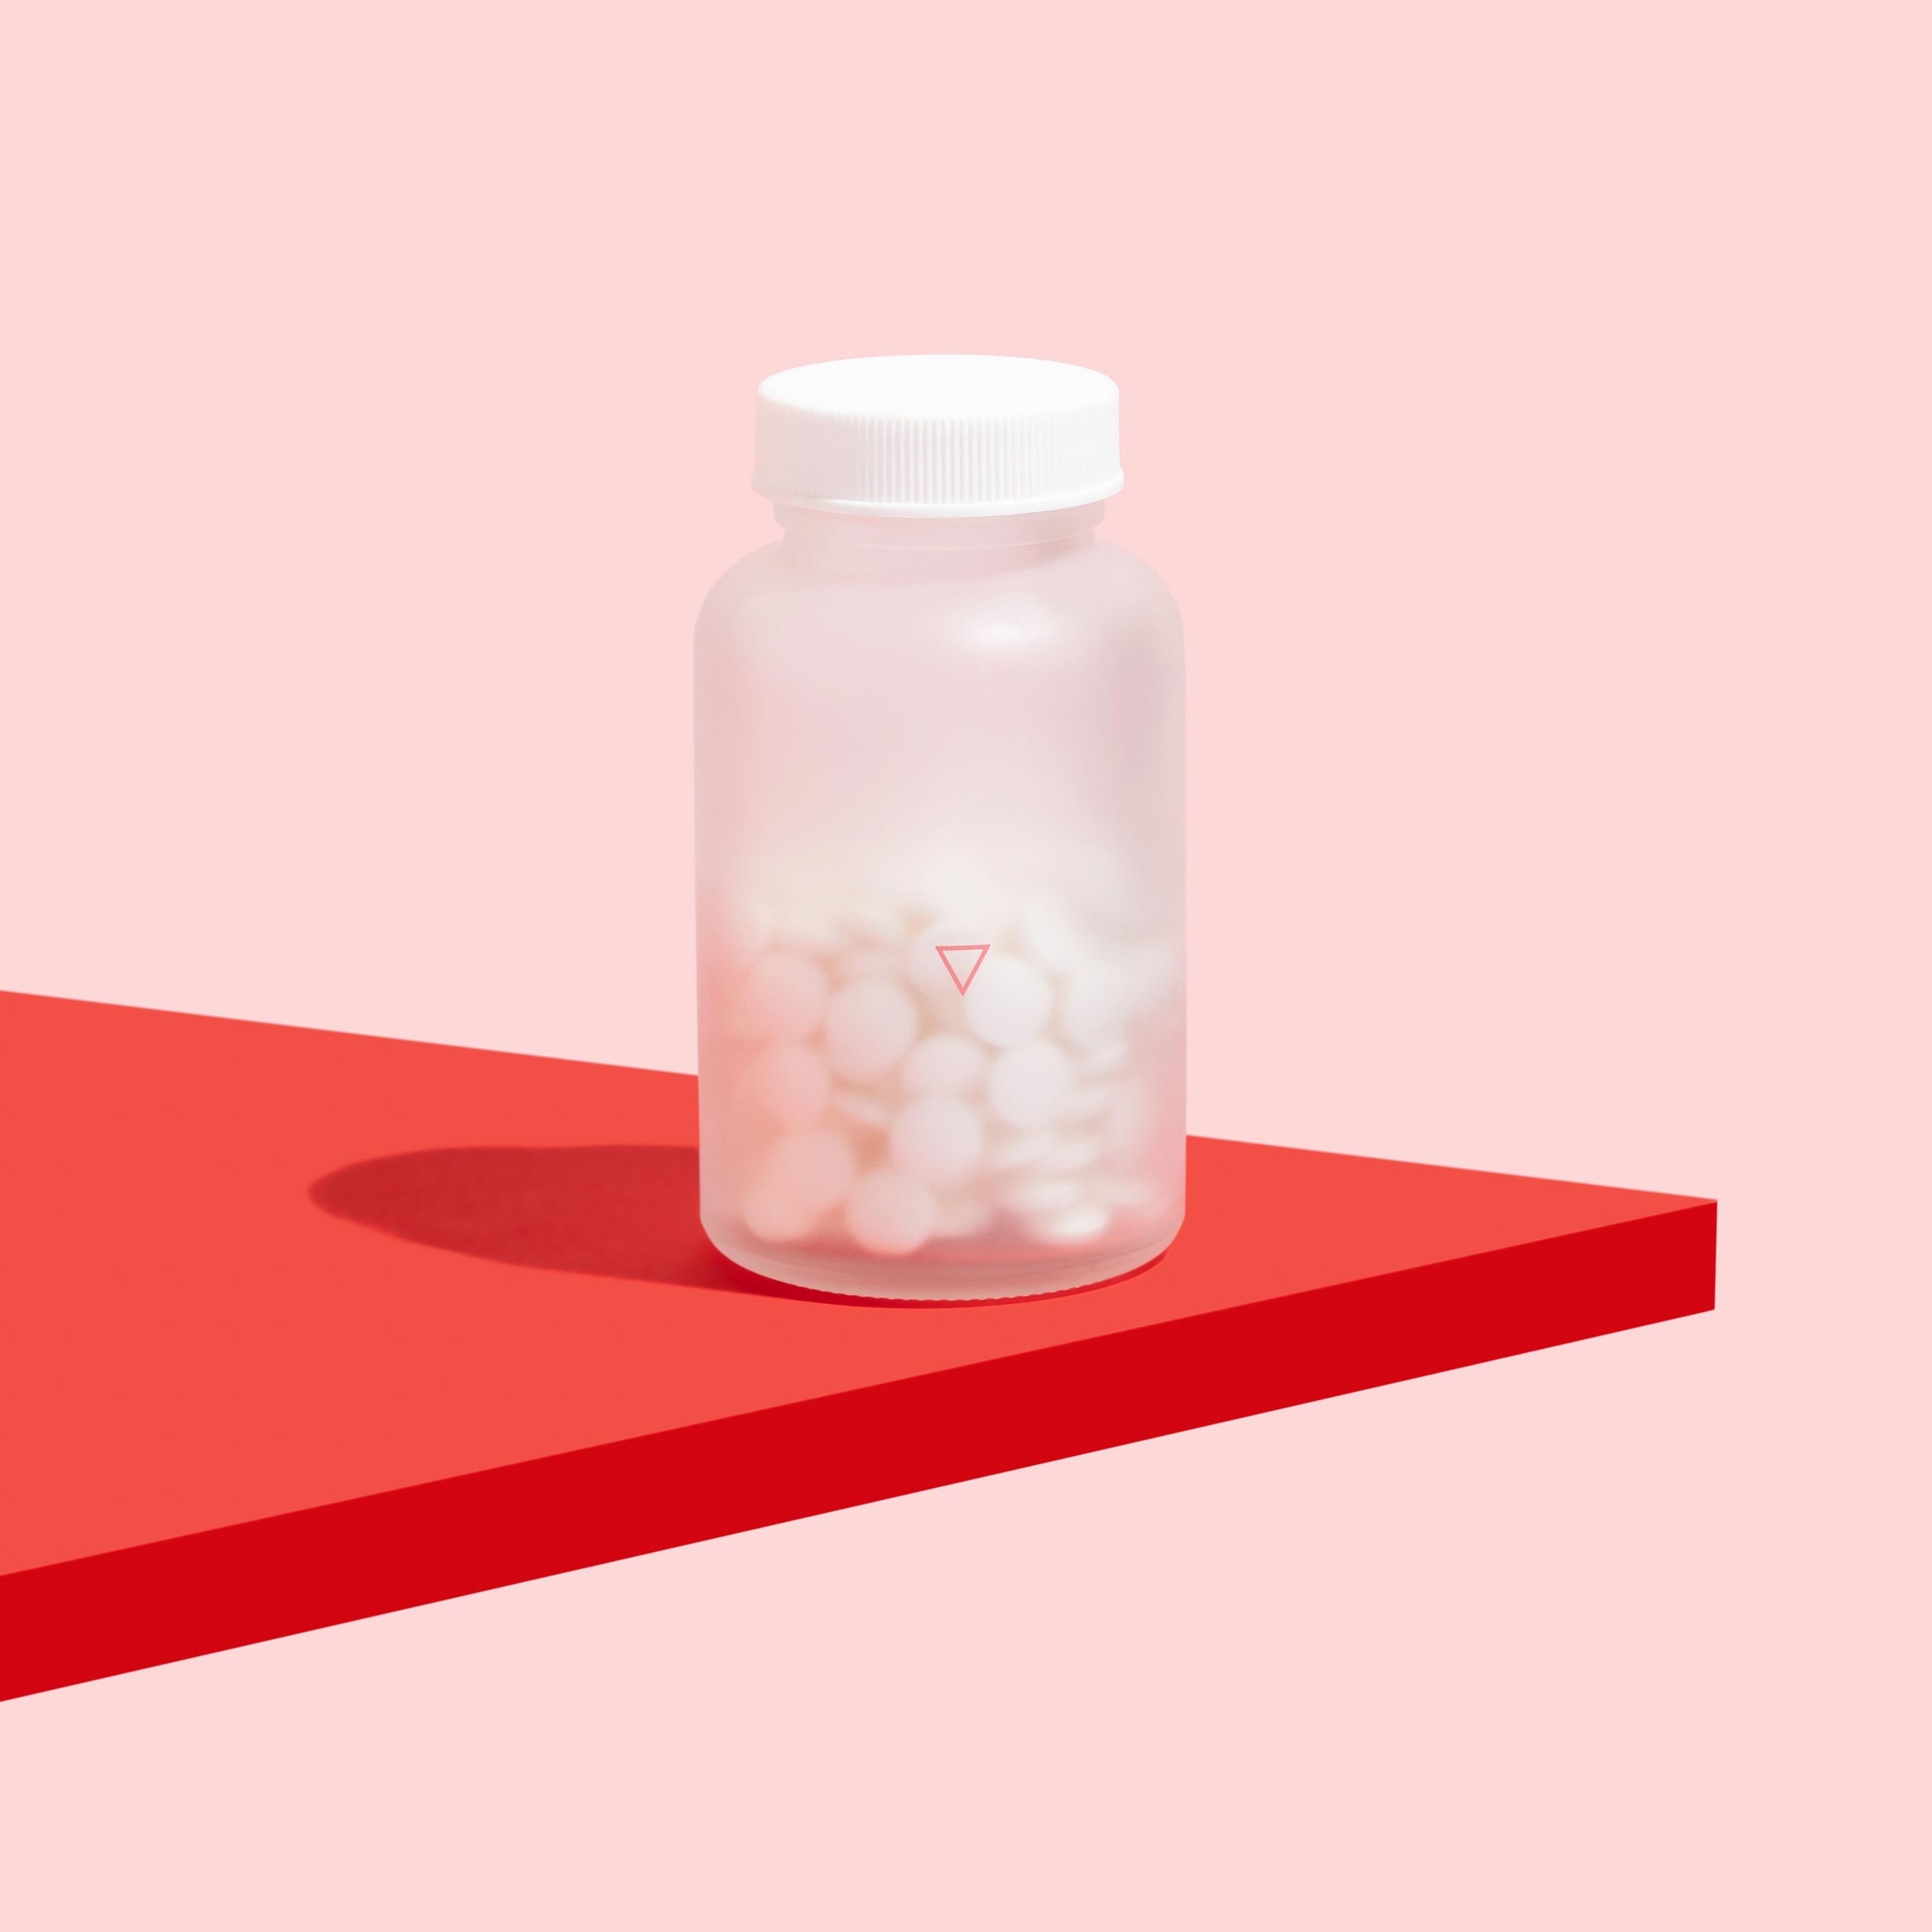 Bottle of probiotics for online reproductive health on red surface, on pink background